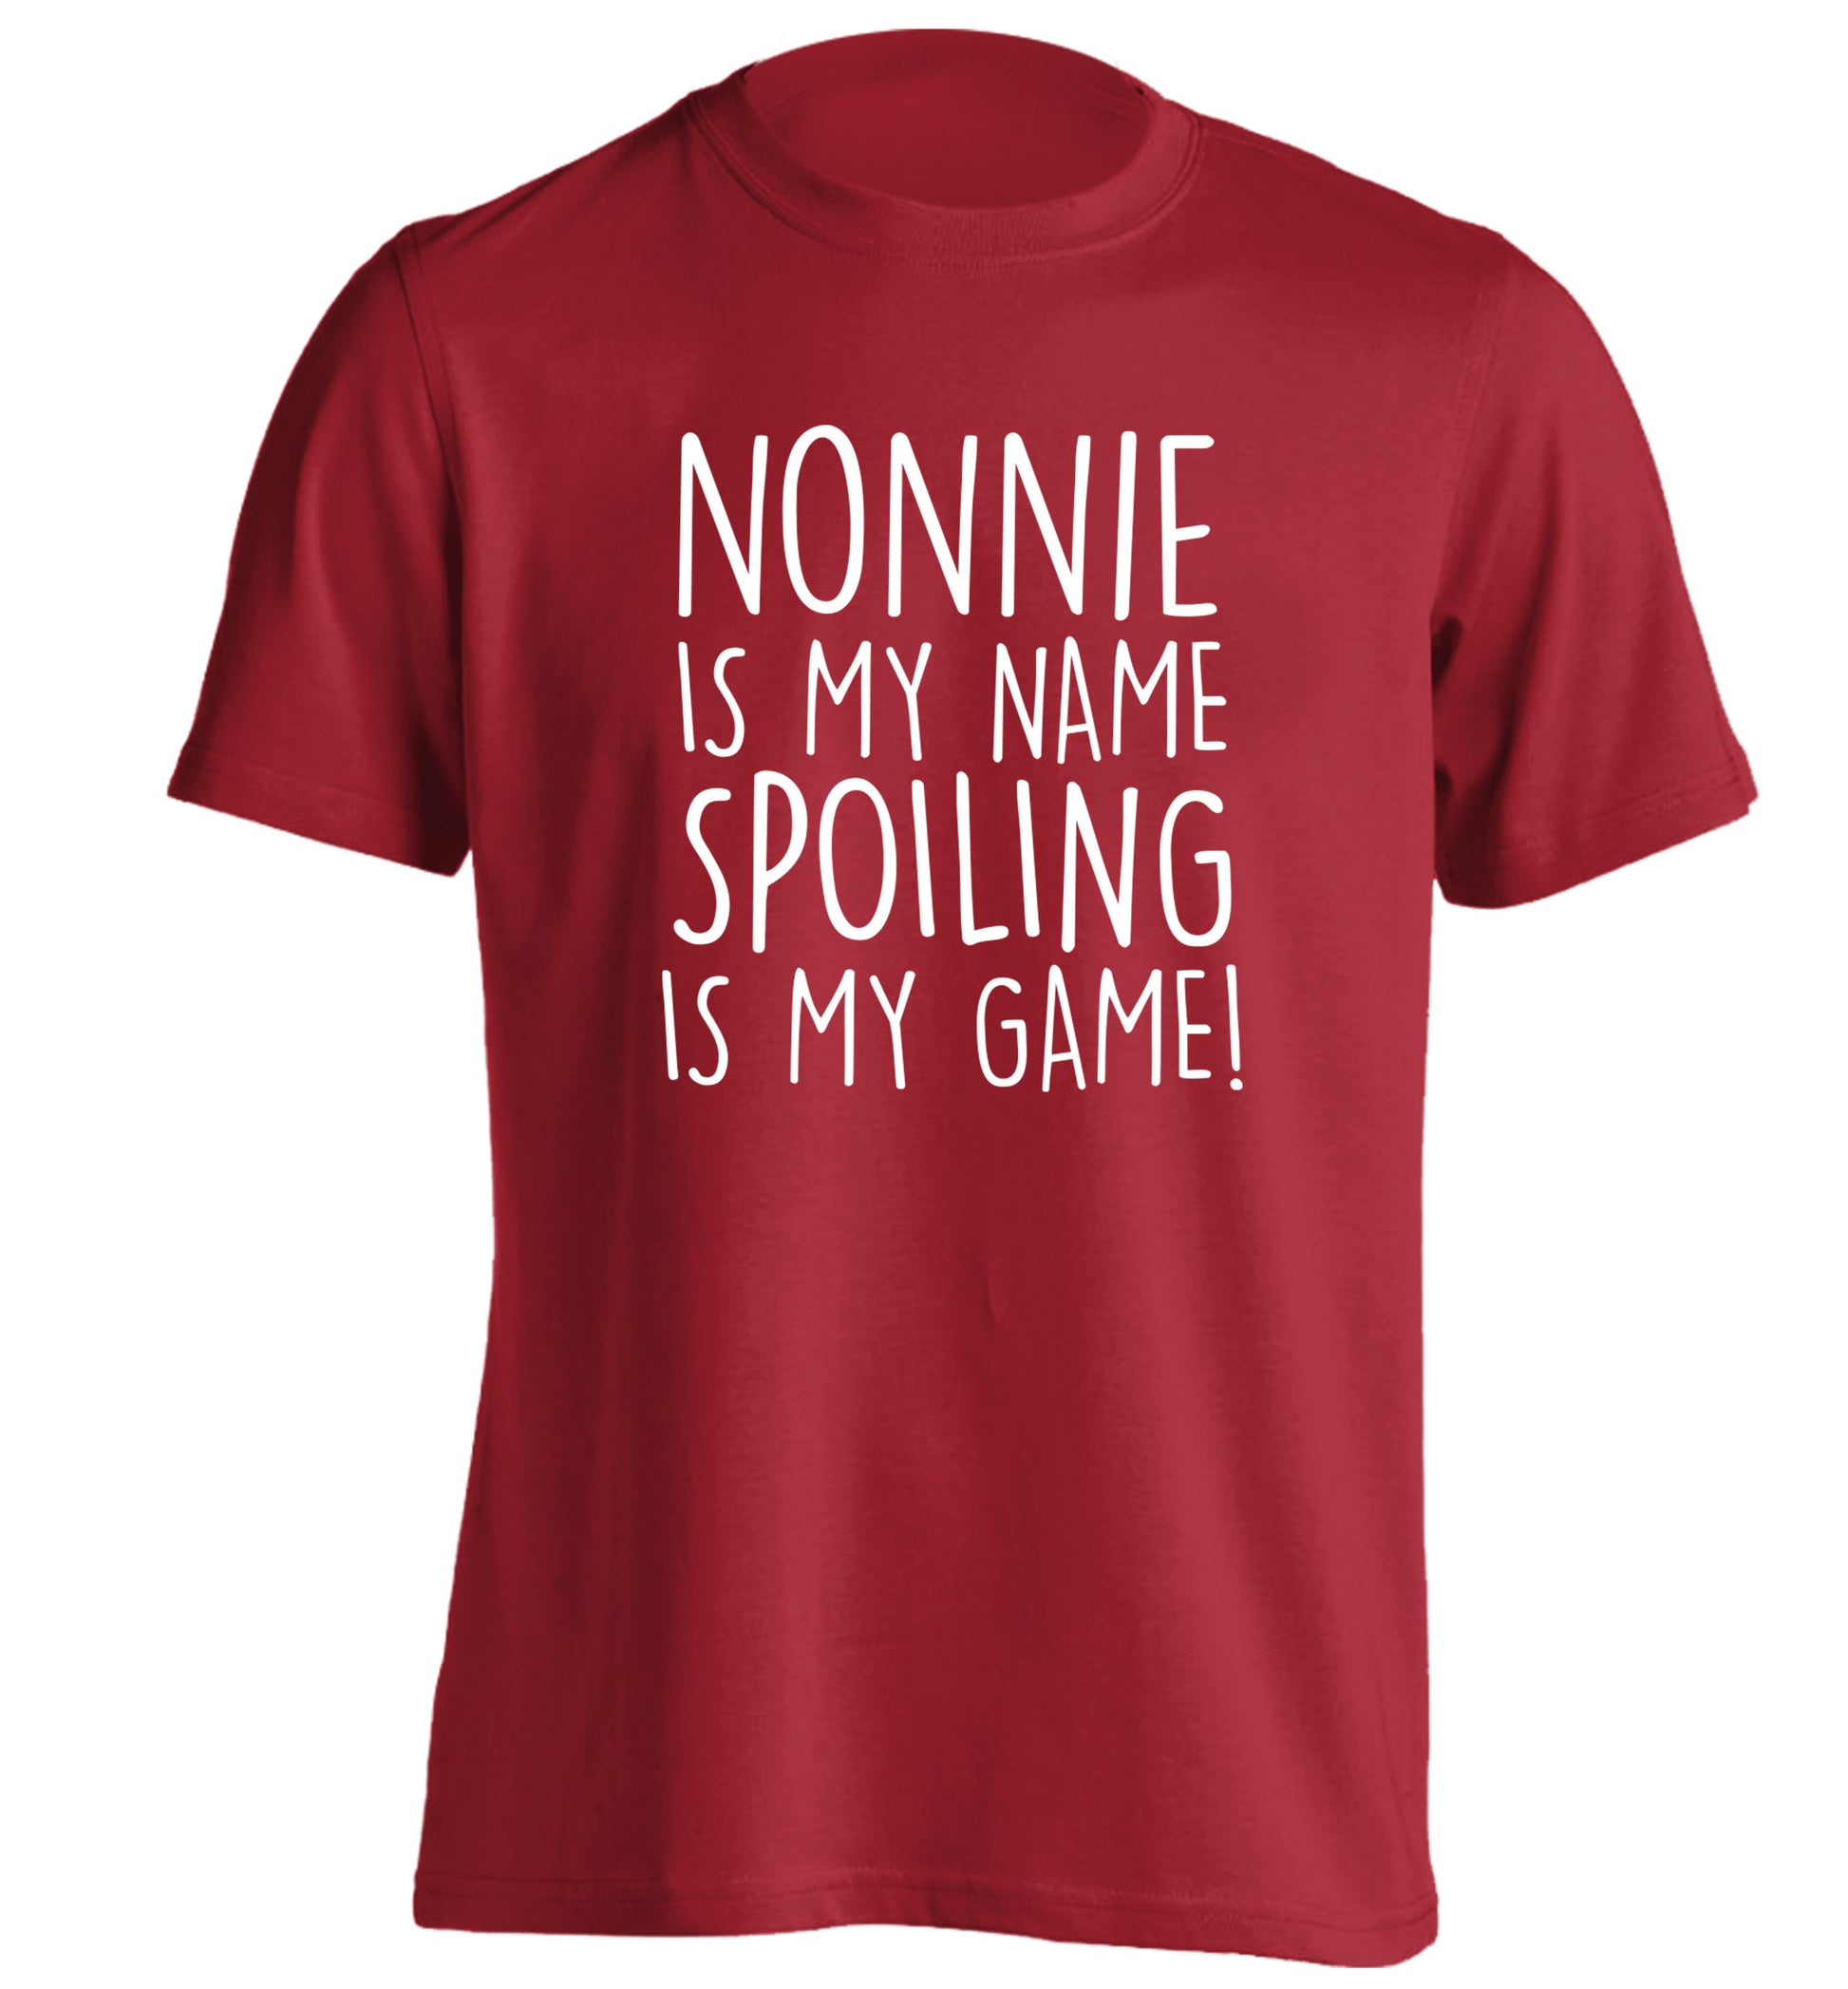 Nonnie is my name, spoiling is my game adults unisex red Tshirt 2XL